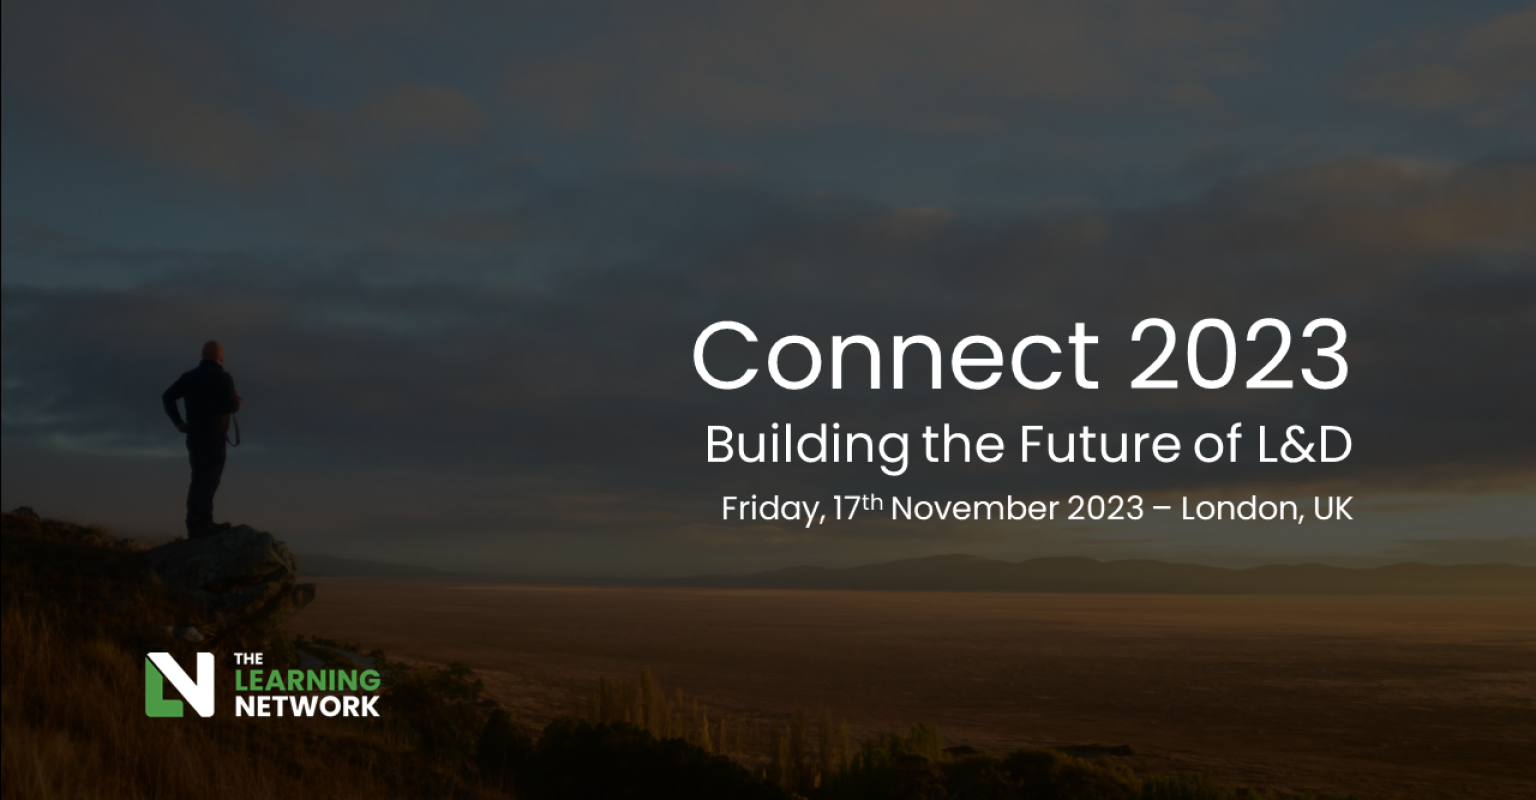 An image of a man on a hill looking towards a sunset. This image represents someone looking to the future. To the right of the man there is some text, which reads: Connect 2023, Building the future of learning and development, Friday 17 November 2023, London